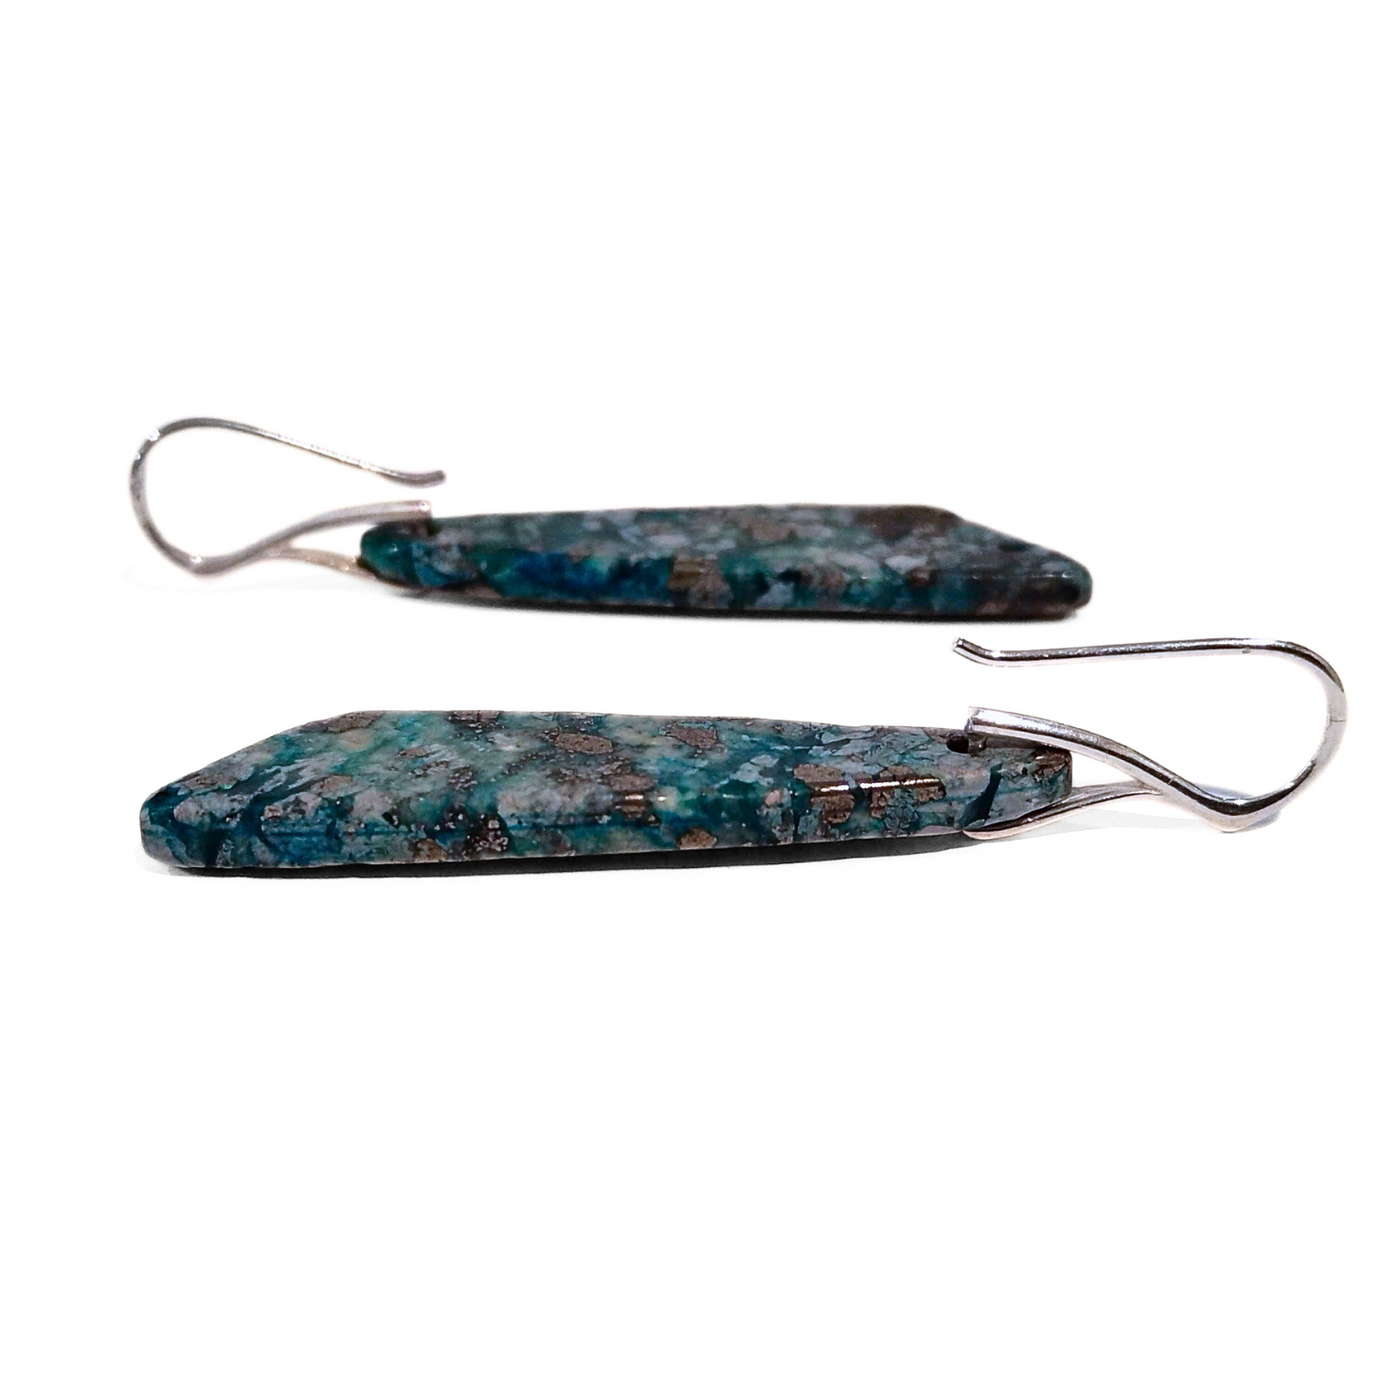 SM-338 Mystery Blue and Pyrite Earrings